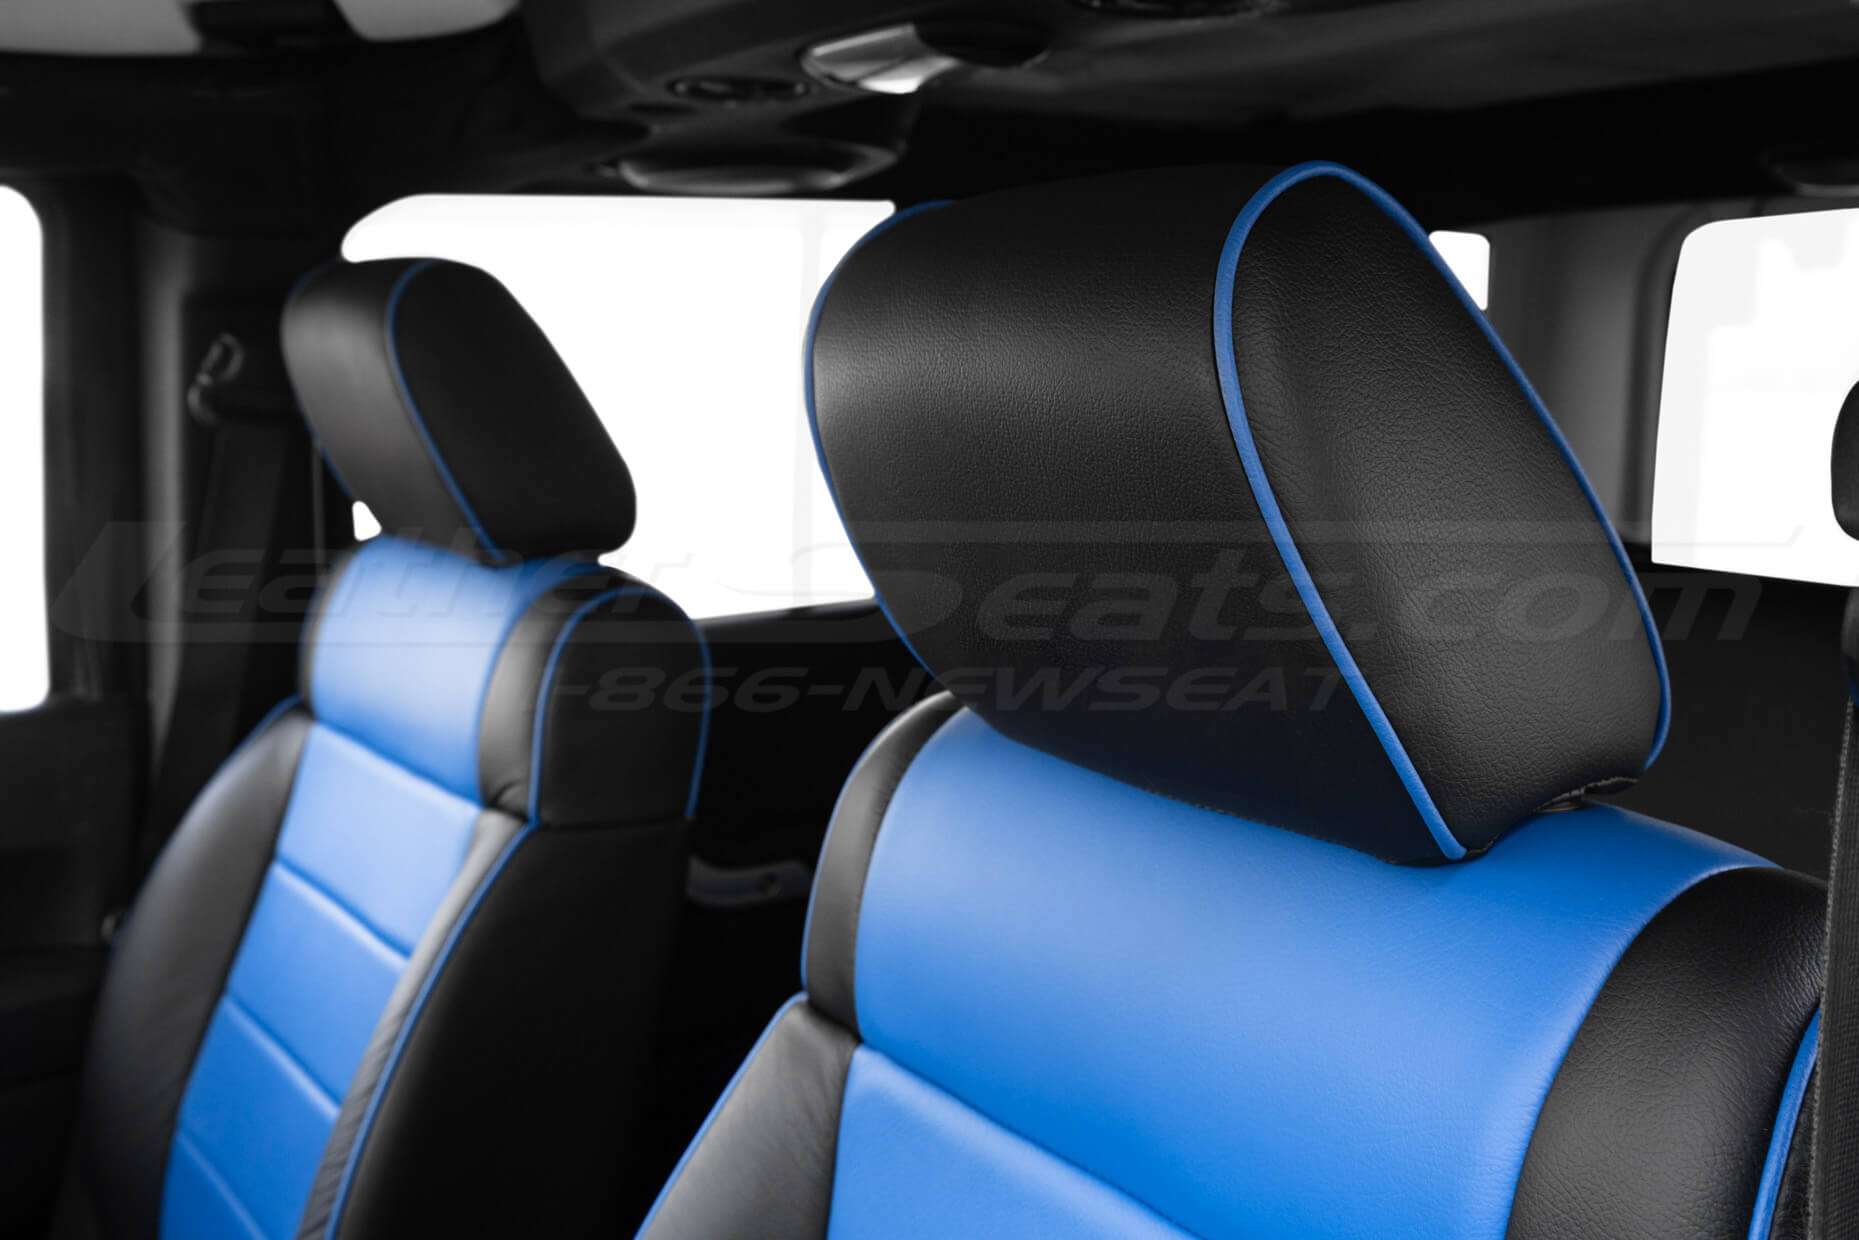 Black leather headrest with Cobalt Blue Piping - close-up